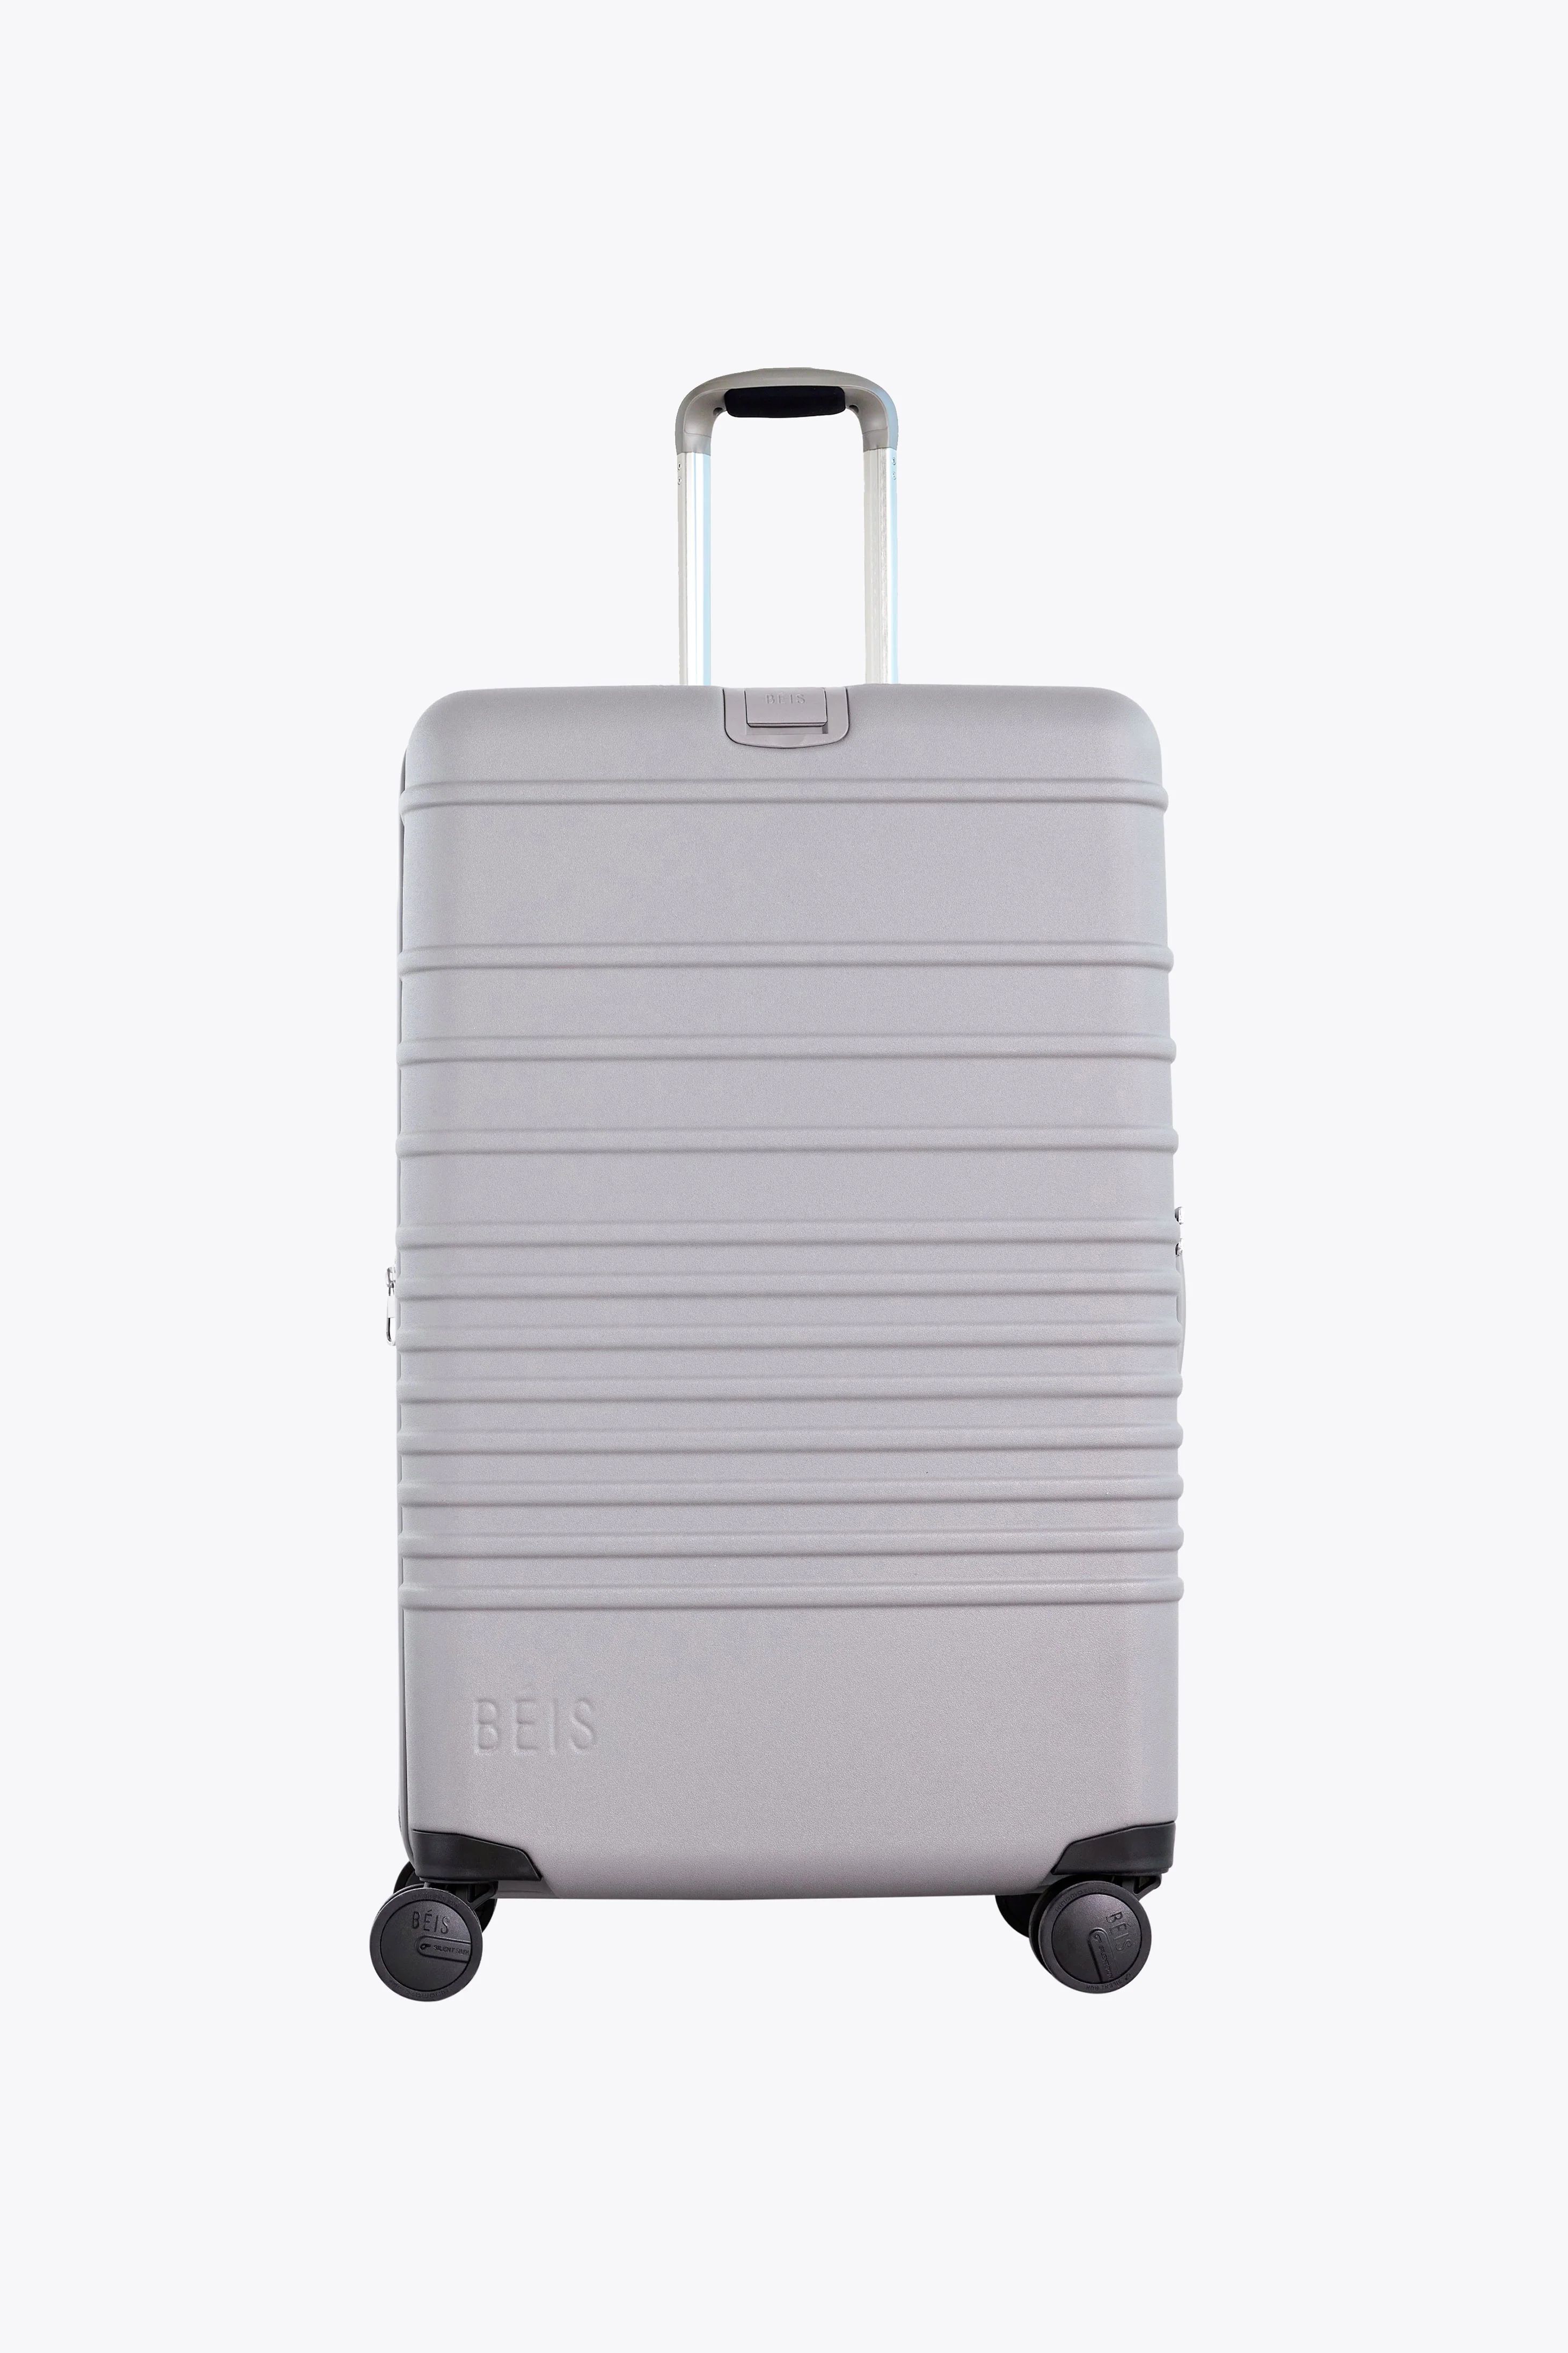 Carry-OnMedium Check-InLarge Check-In | BÉIS Travel